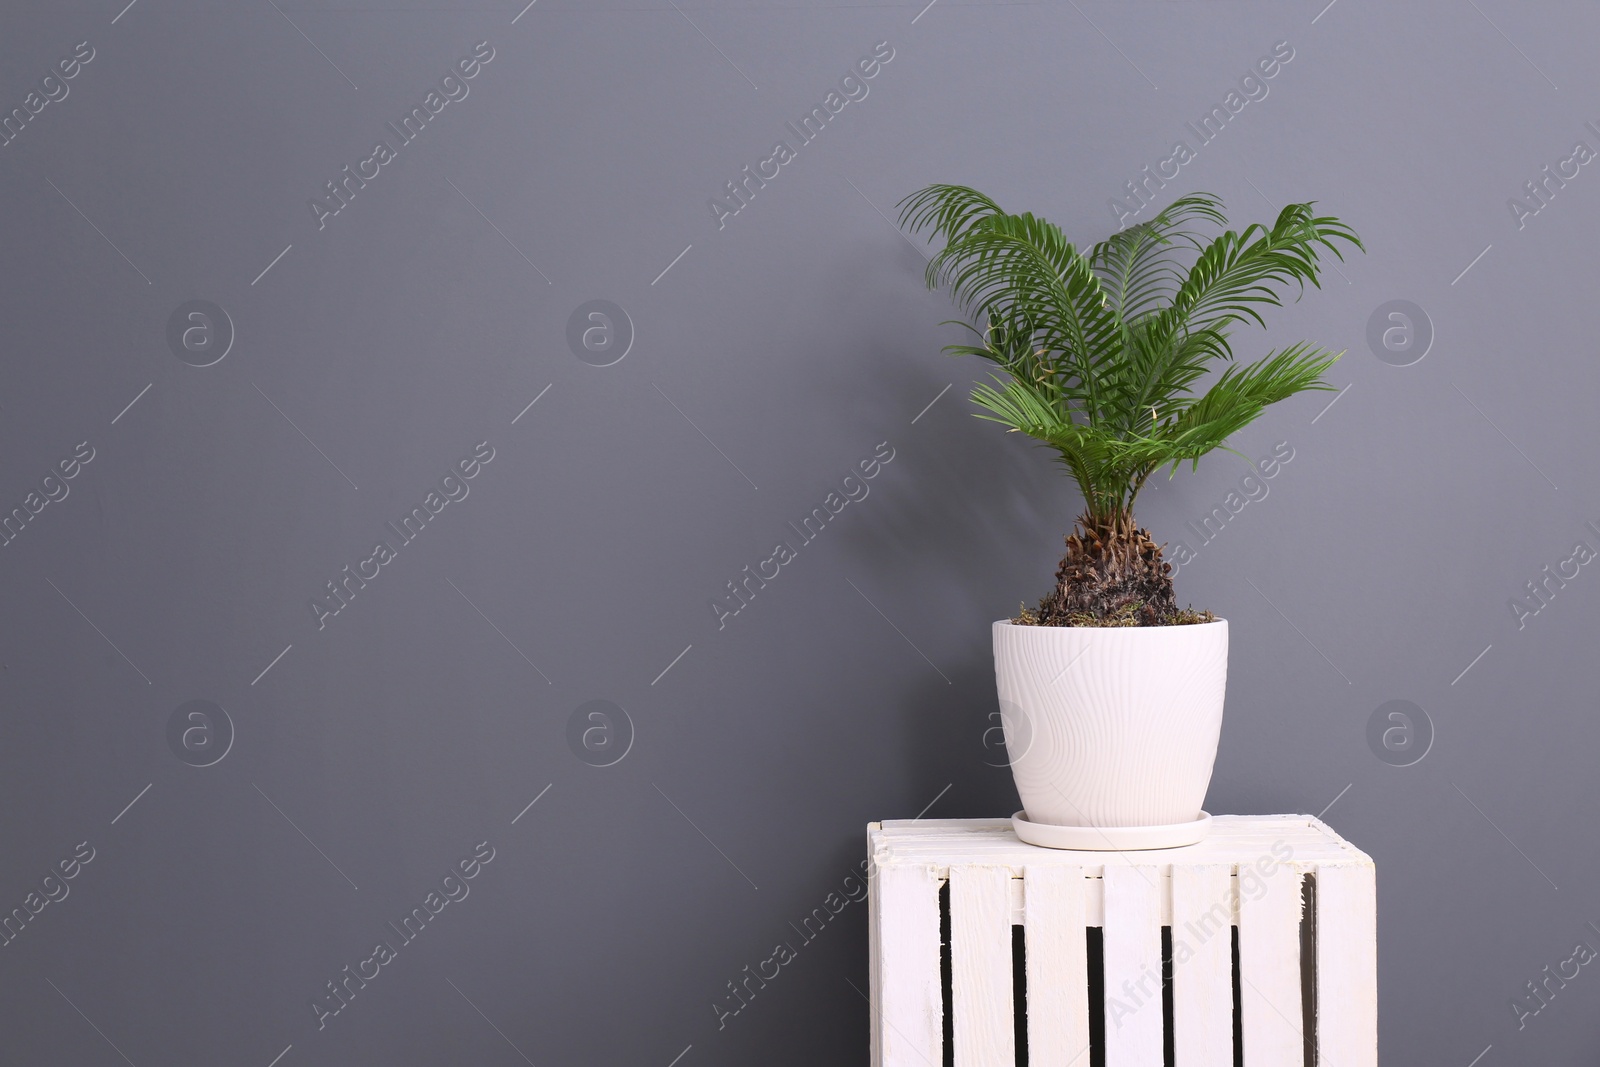 Photo of Tropical plant with green leaves on wooden crate against grey background